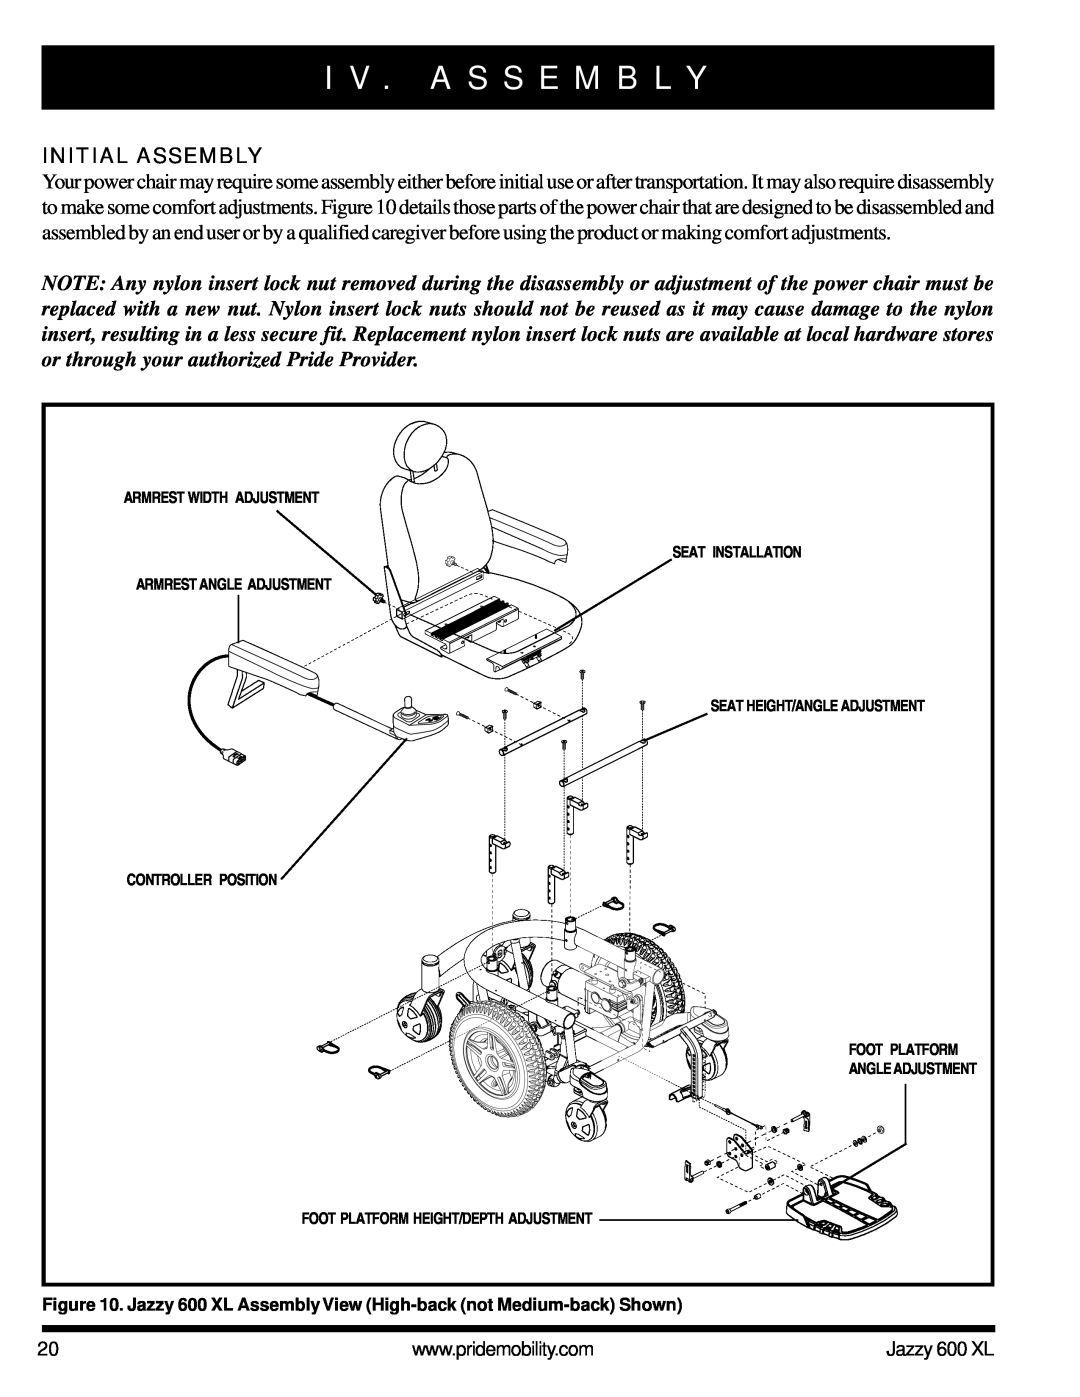 Pride Mobility Jazzy 600 XL owner manual I V . A S S E M B L Y, Initial Assembly 